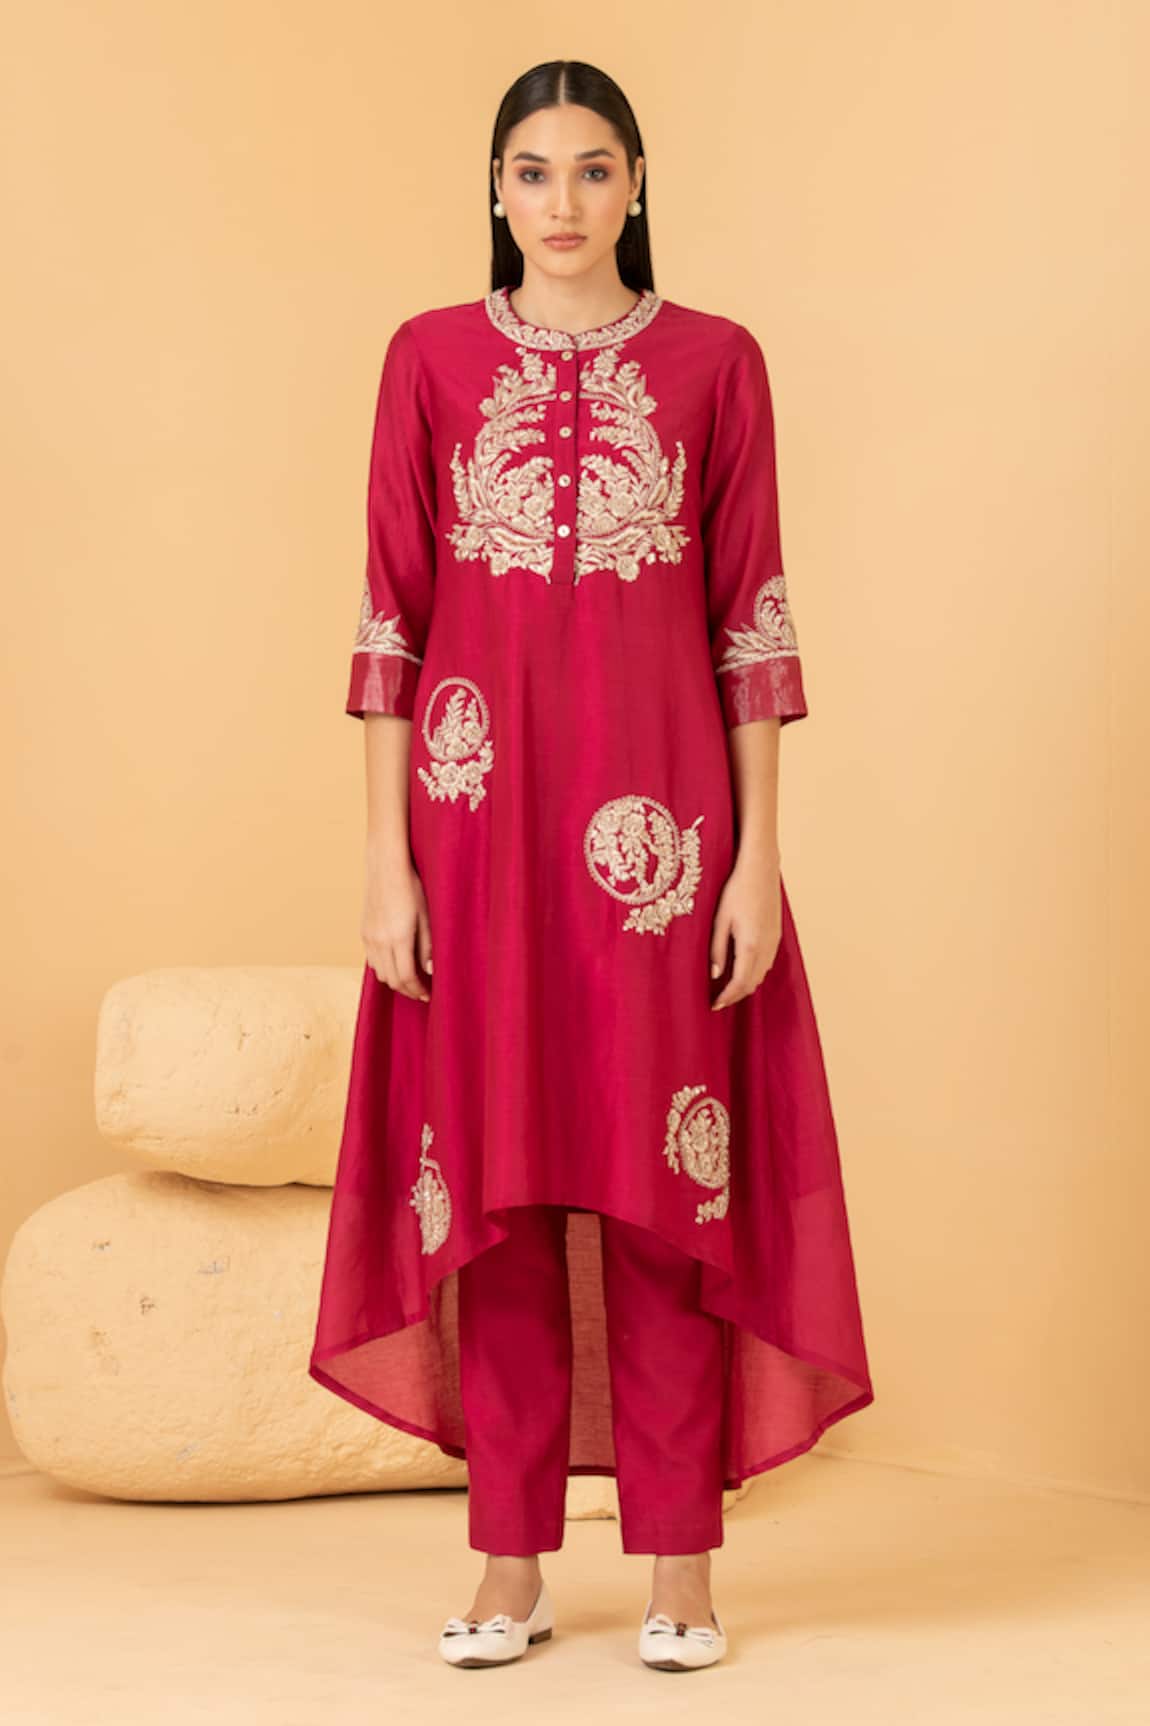 Divi by sonal khandelwal Embroidered Asymmetric Tunic & Pant Set